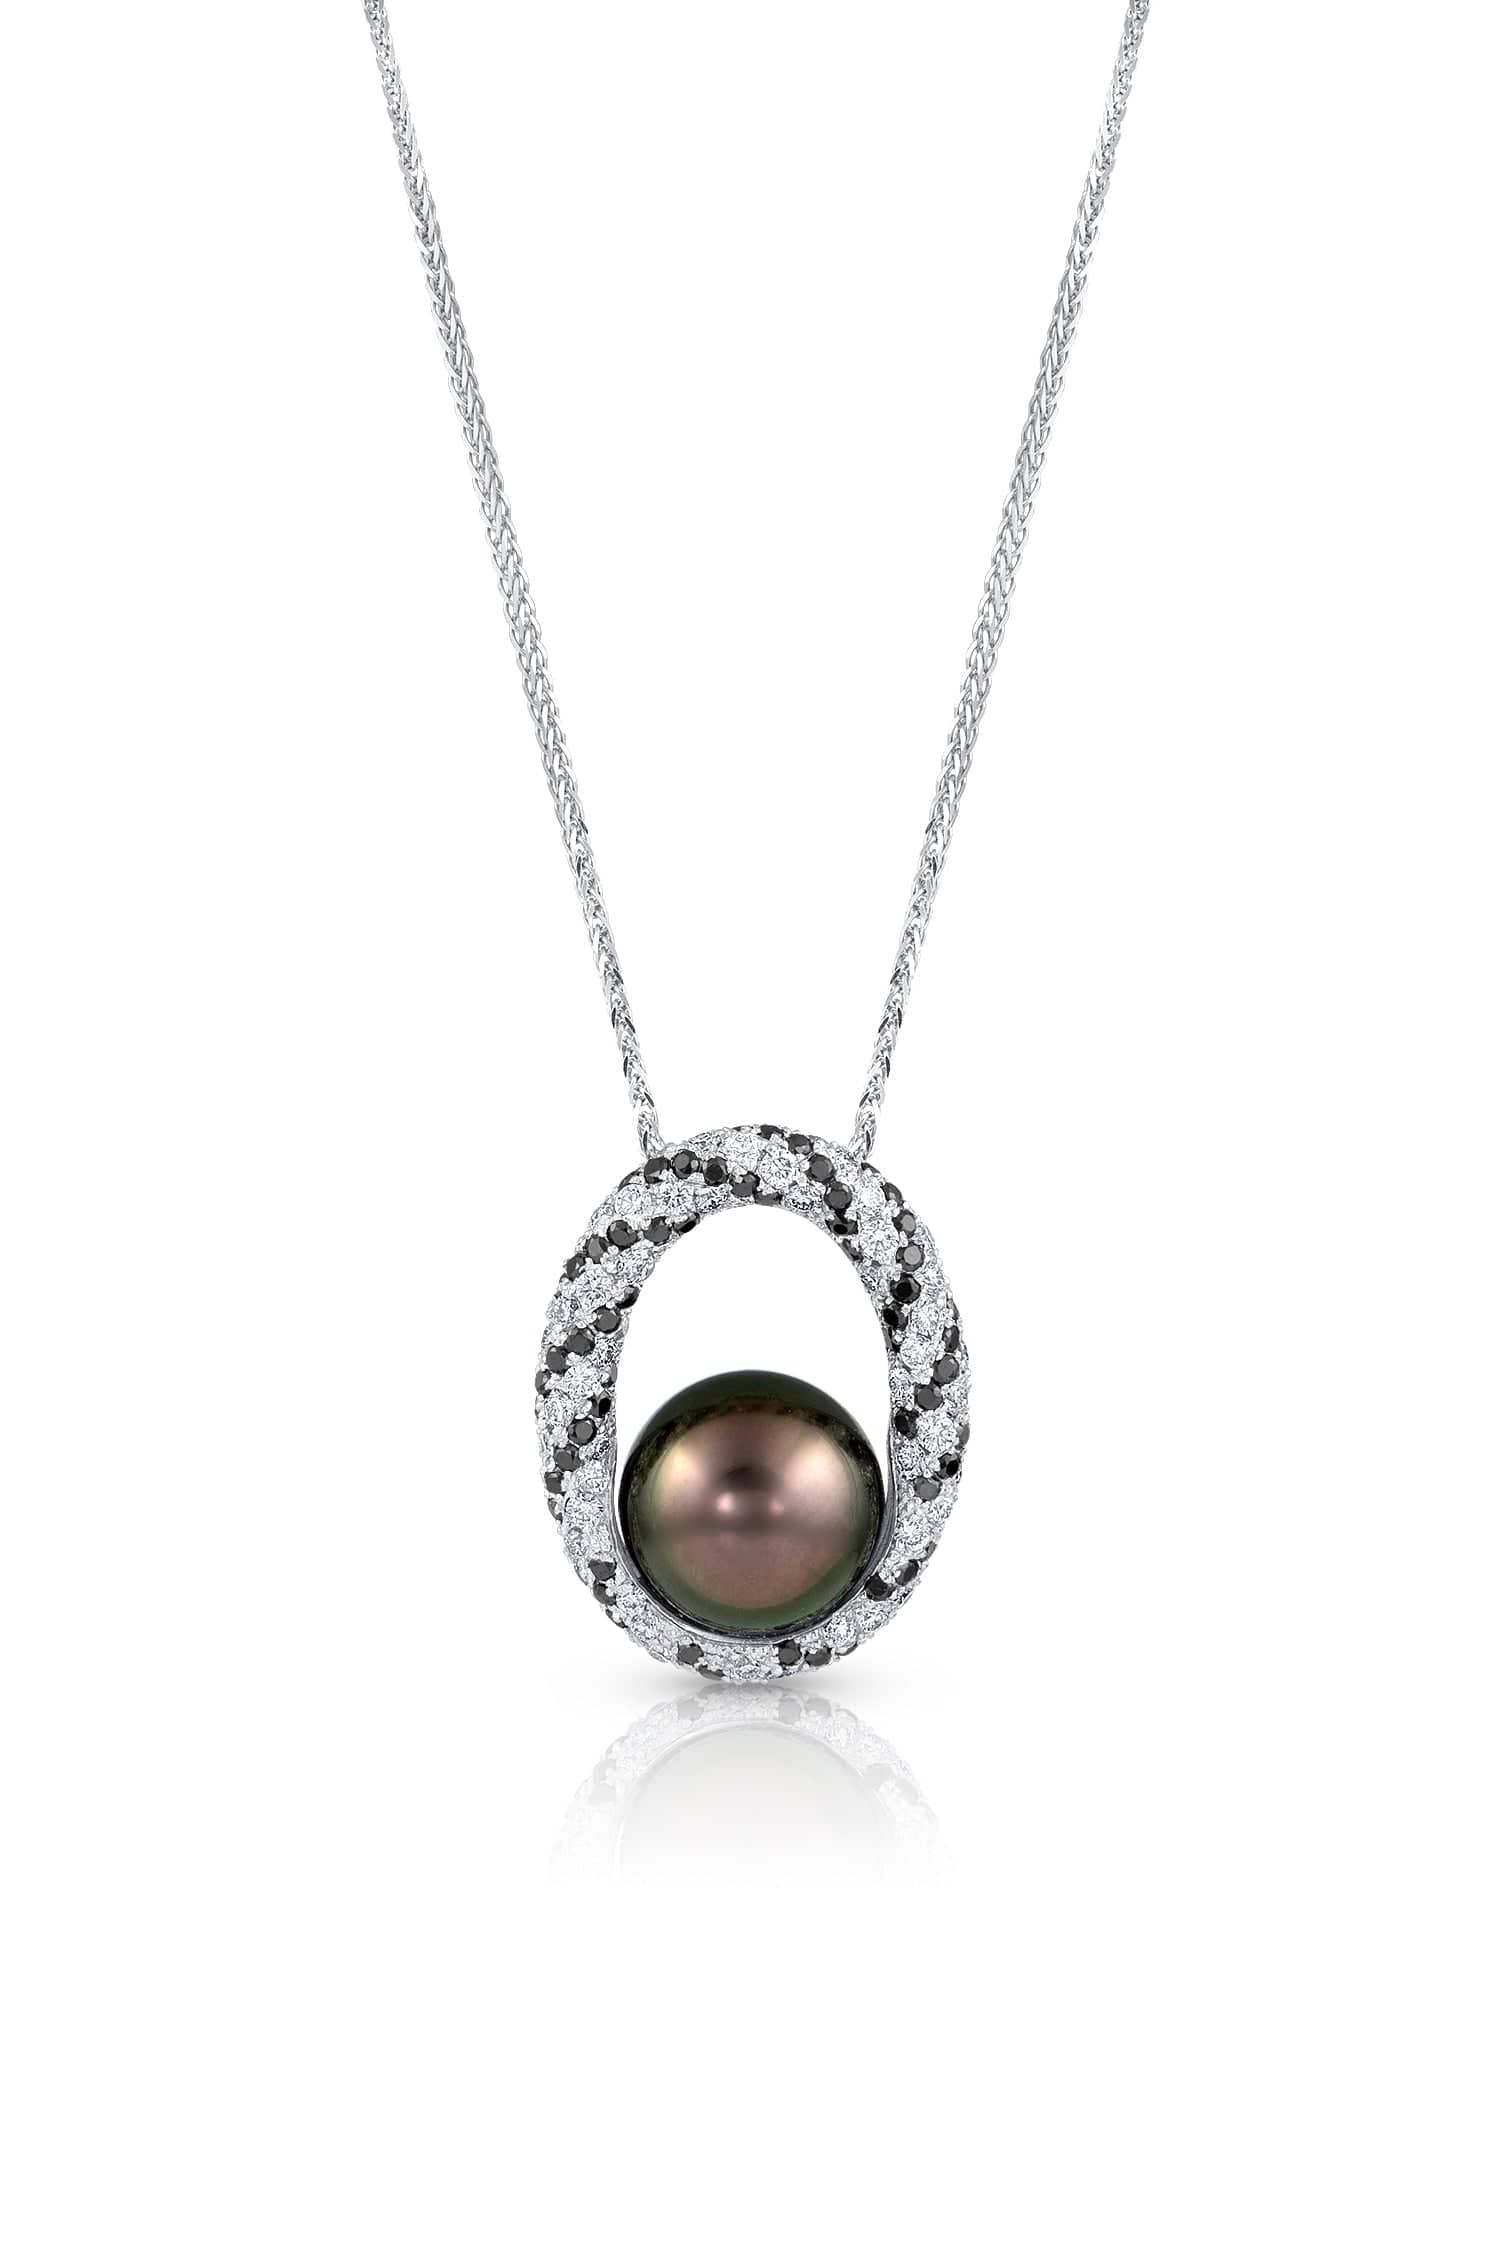 BAGGINS-Tahitian Pearl Twist Pendant Necklace-WHITE GOLD